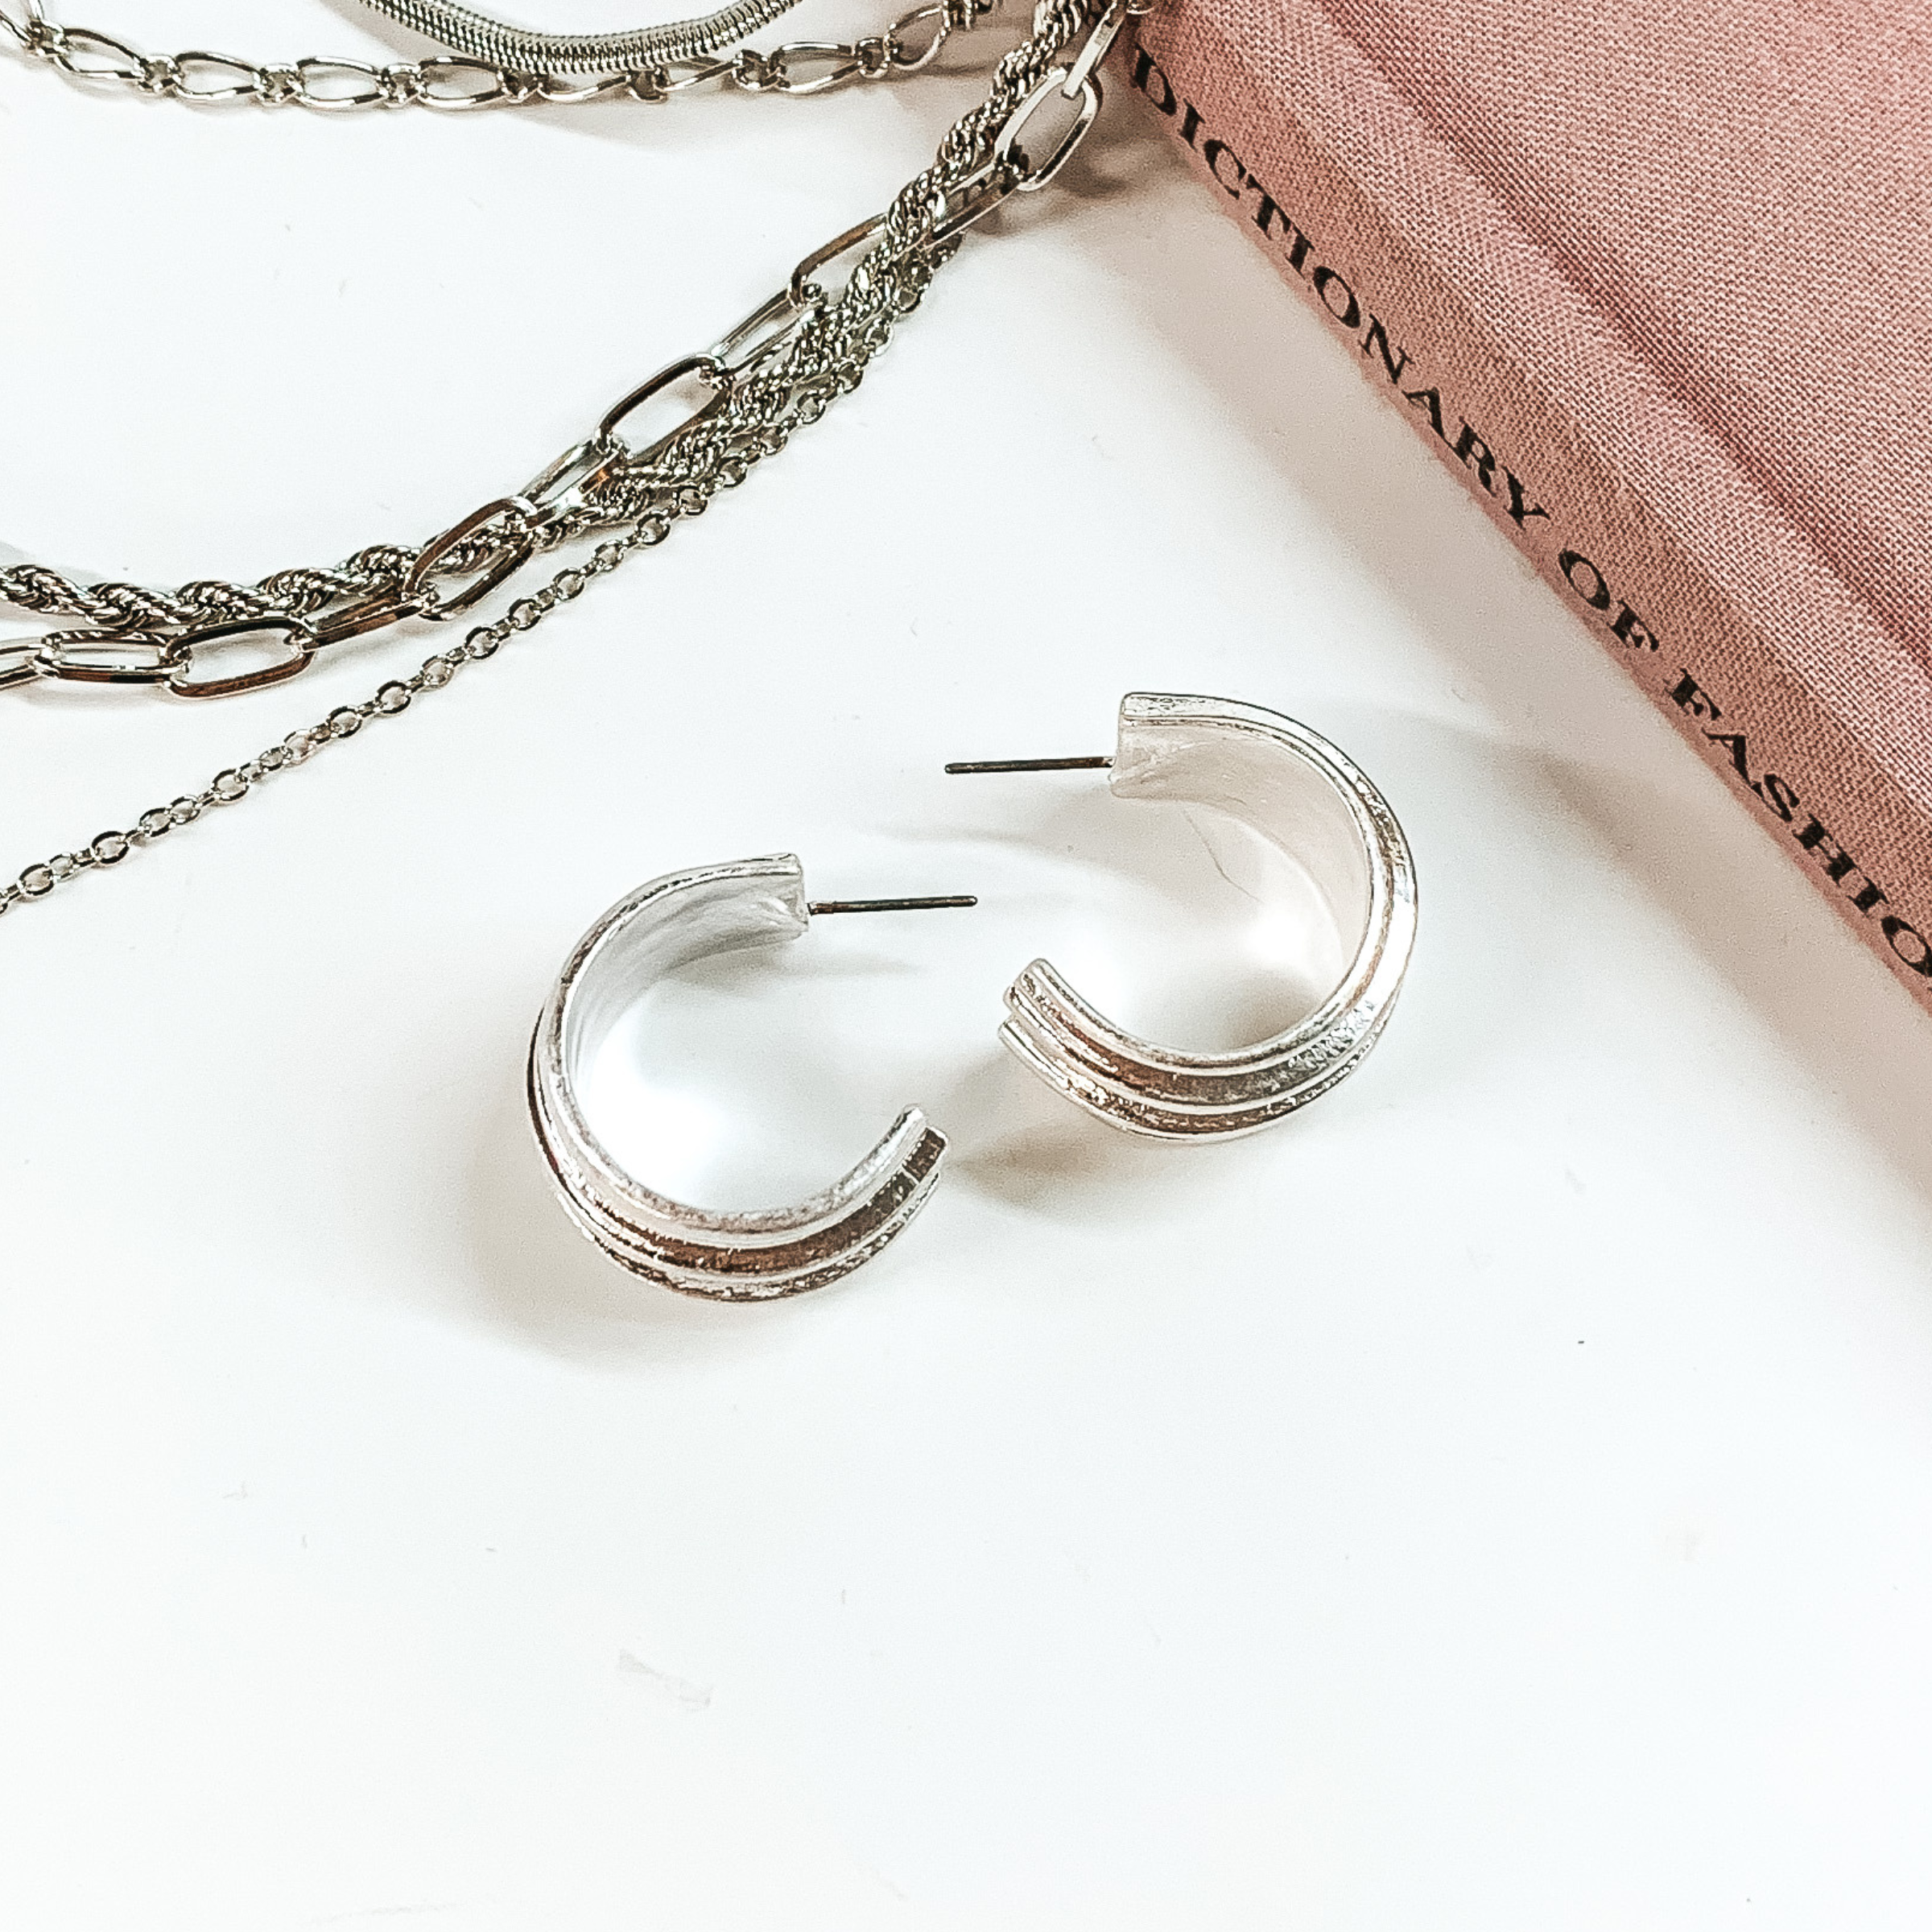 Enjoy the View Thick Hoop Earrings in Silver Tone - Giddy Up Glamour Boutique